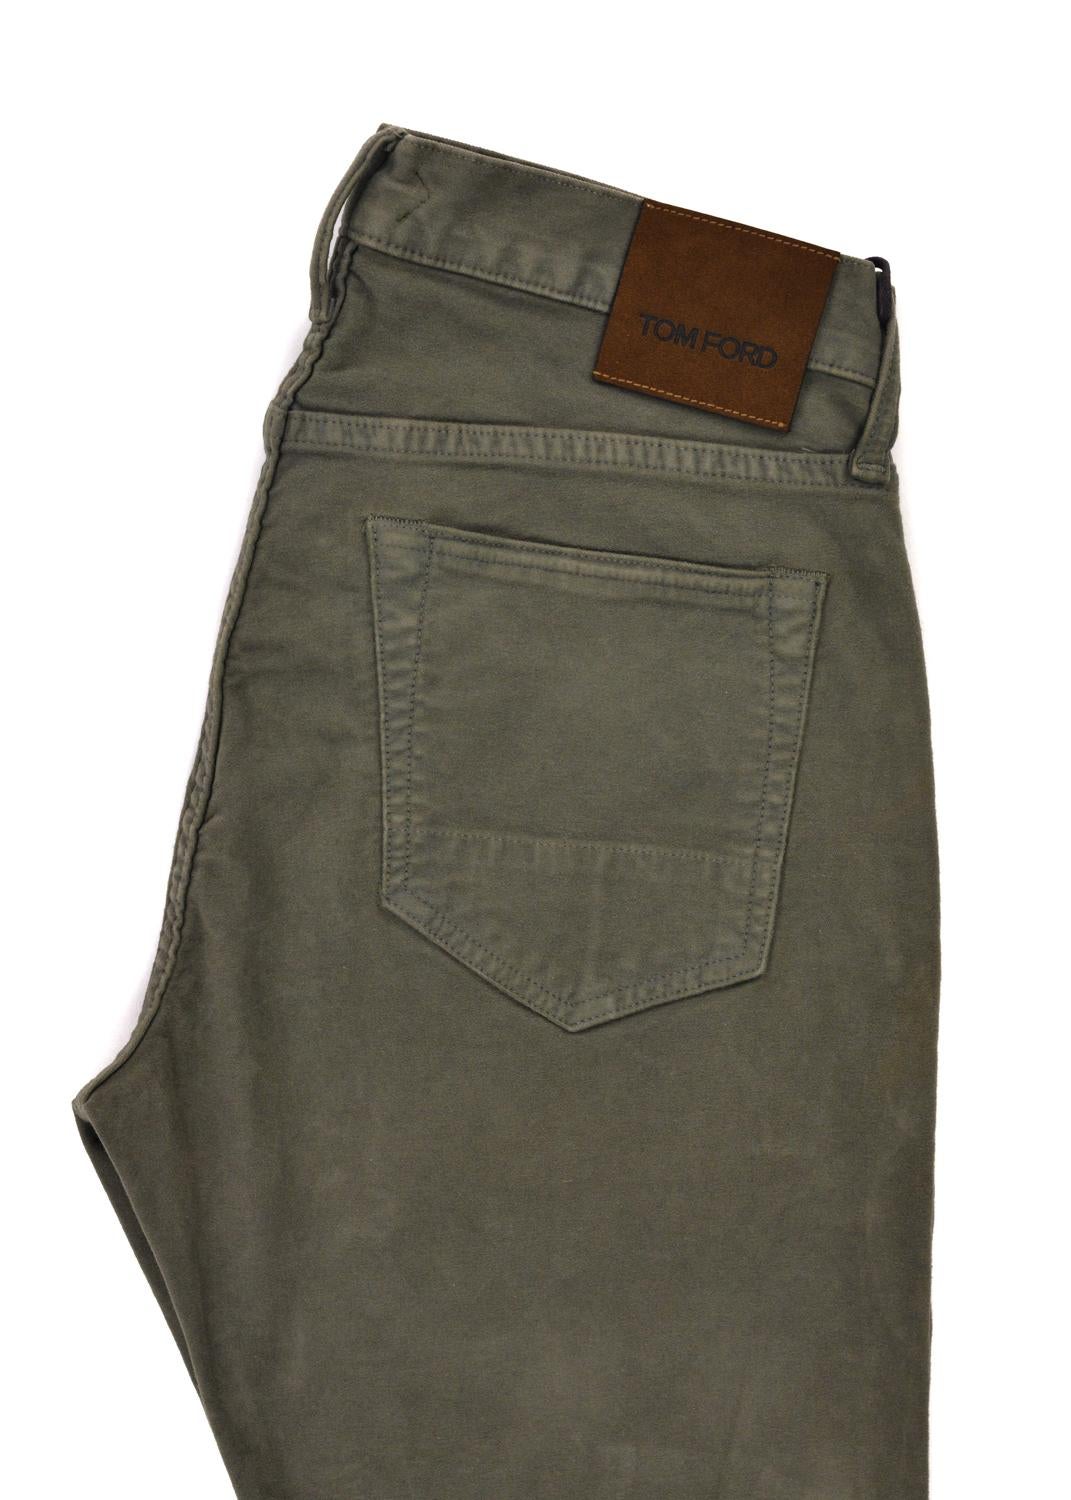 Bask in the appreciation for aesthetics in your light olive Tom Ford Jeans. These pants feature a light olive green color, smooth cotton texture, and casual straight fit. You can pair these trousers with a relaxed fit t shirt or classic white button